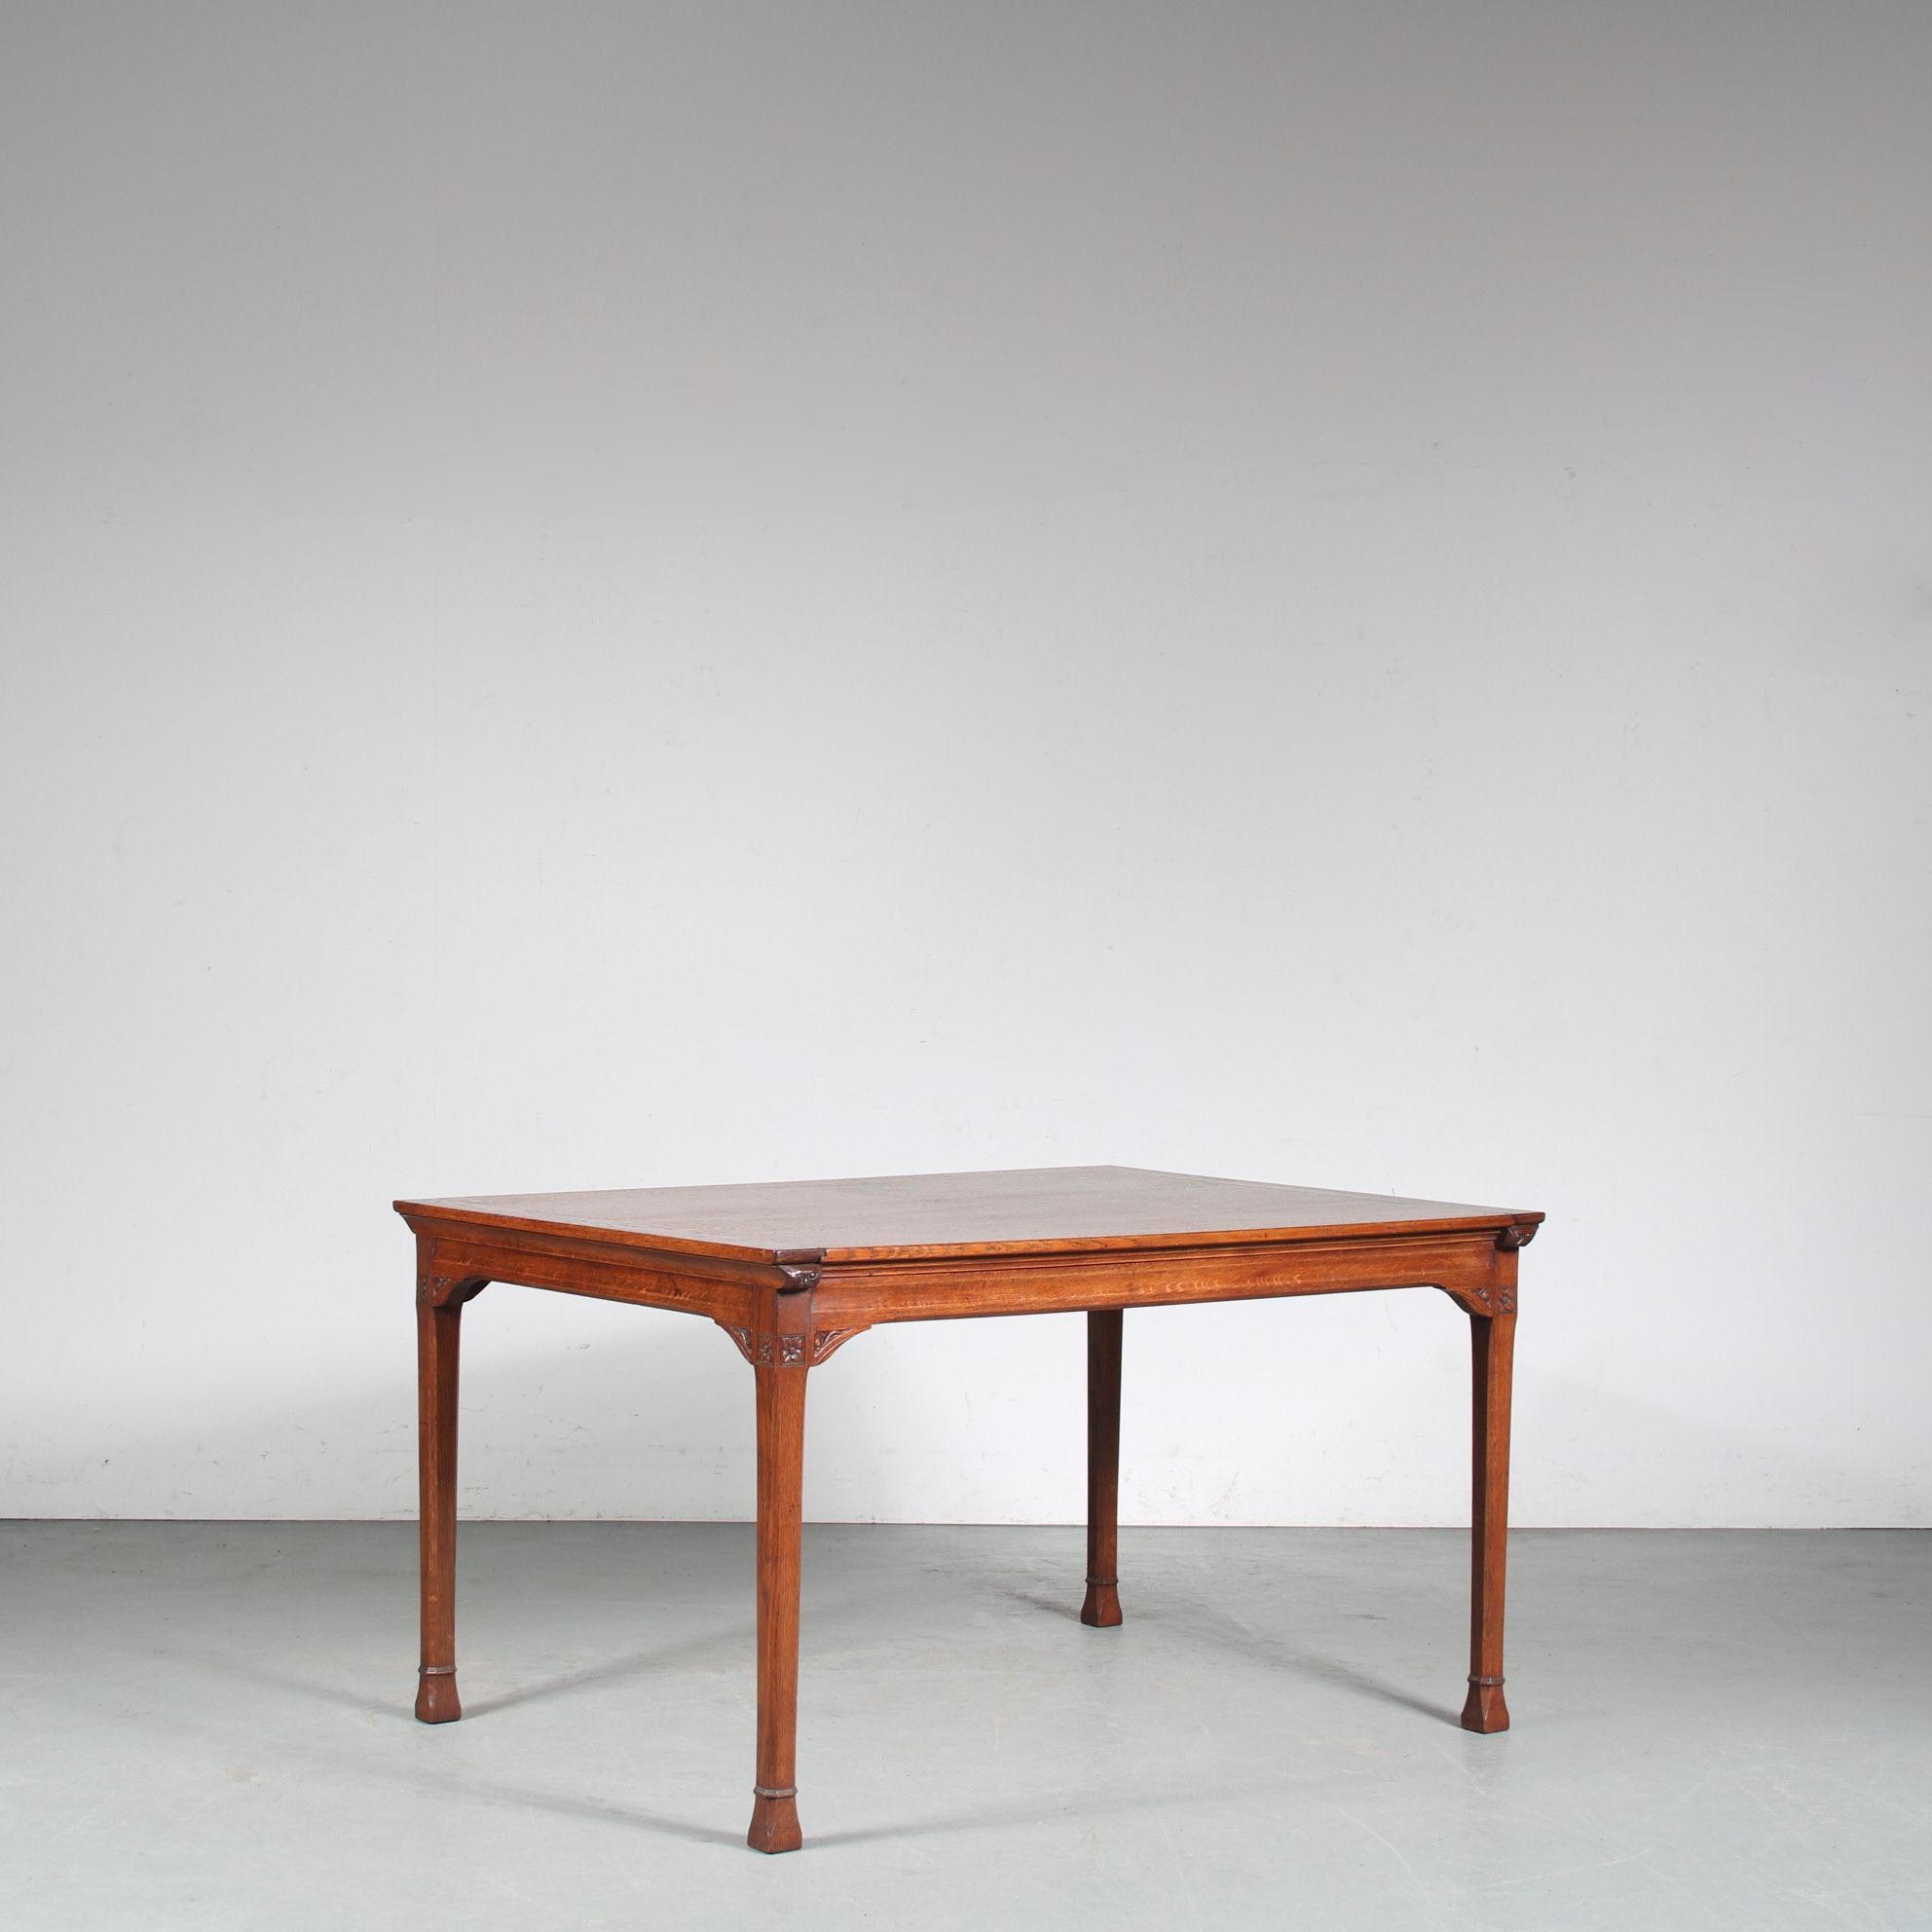 A beautiful dining table, designed by Gerrit Willem Dijsselhof and manufactured in the Netherlands around 1900.

Made of the highest quality oak wood in a nice, warm brown colour. The legs and corners of the table have beautiful carved details. A